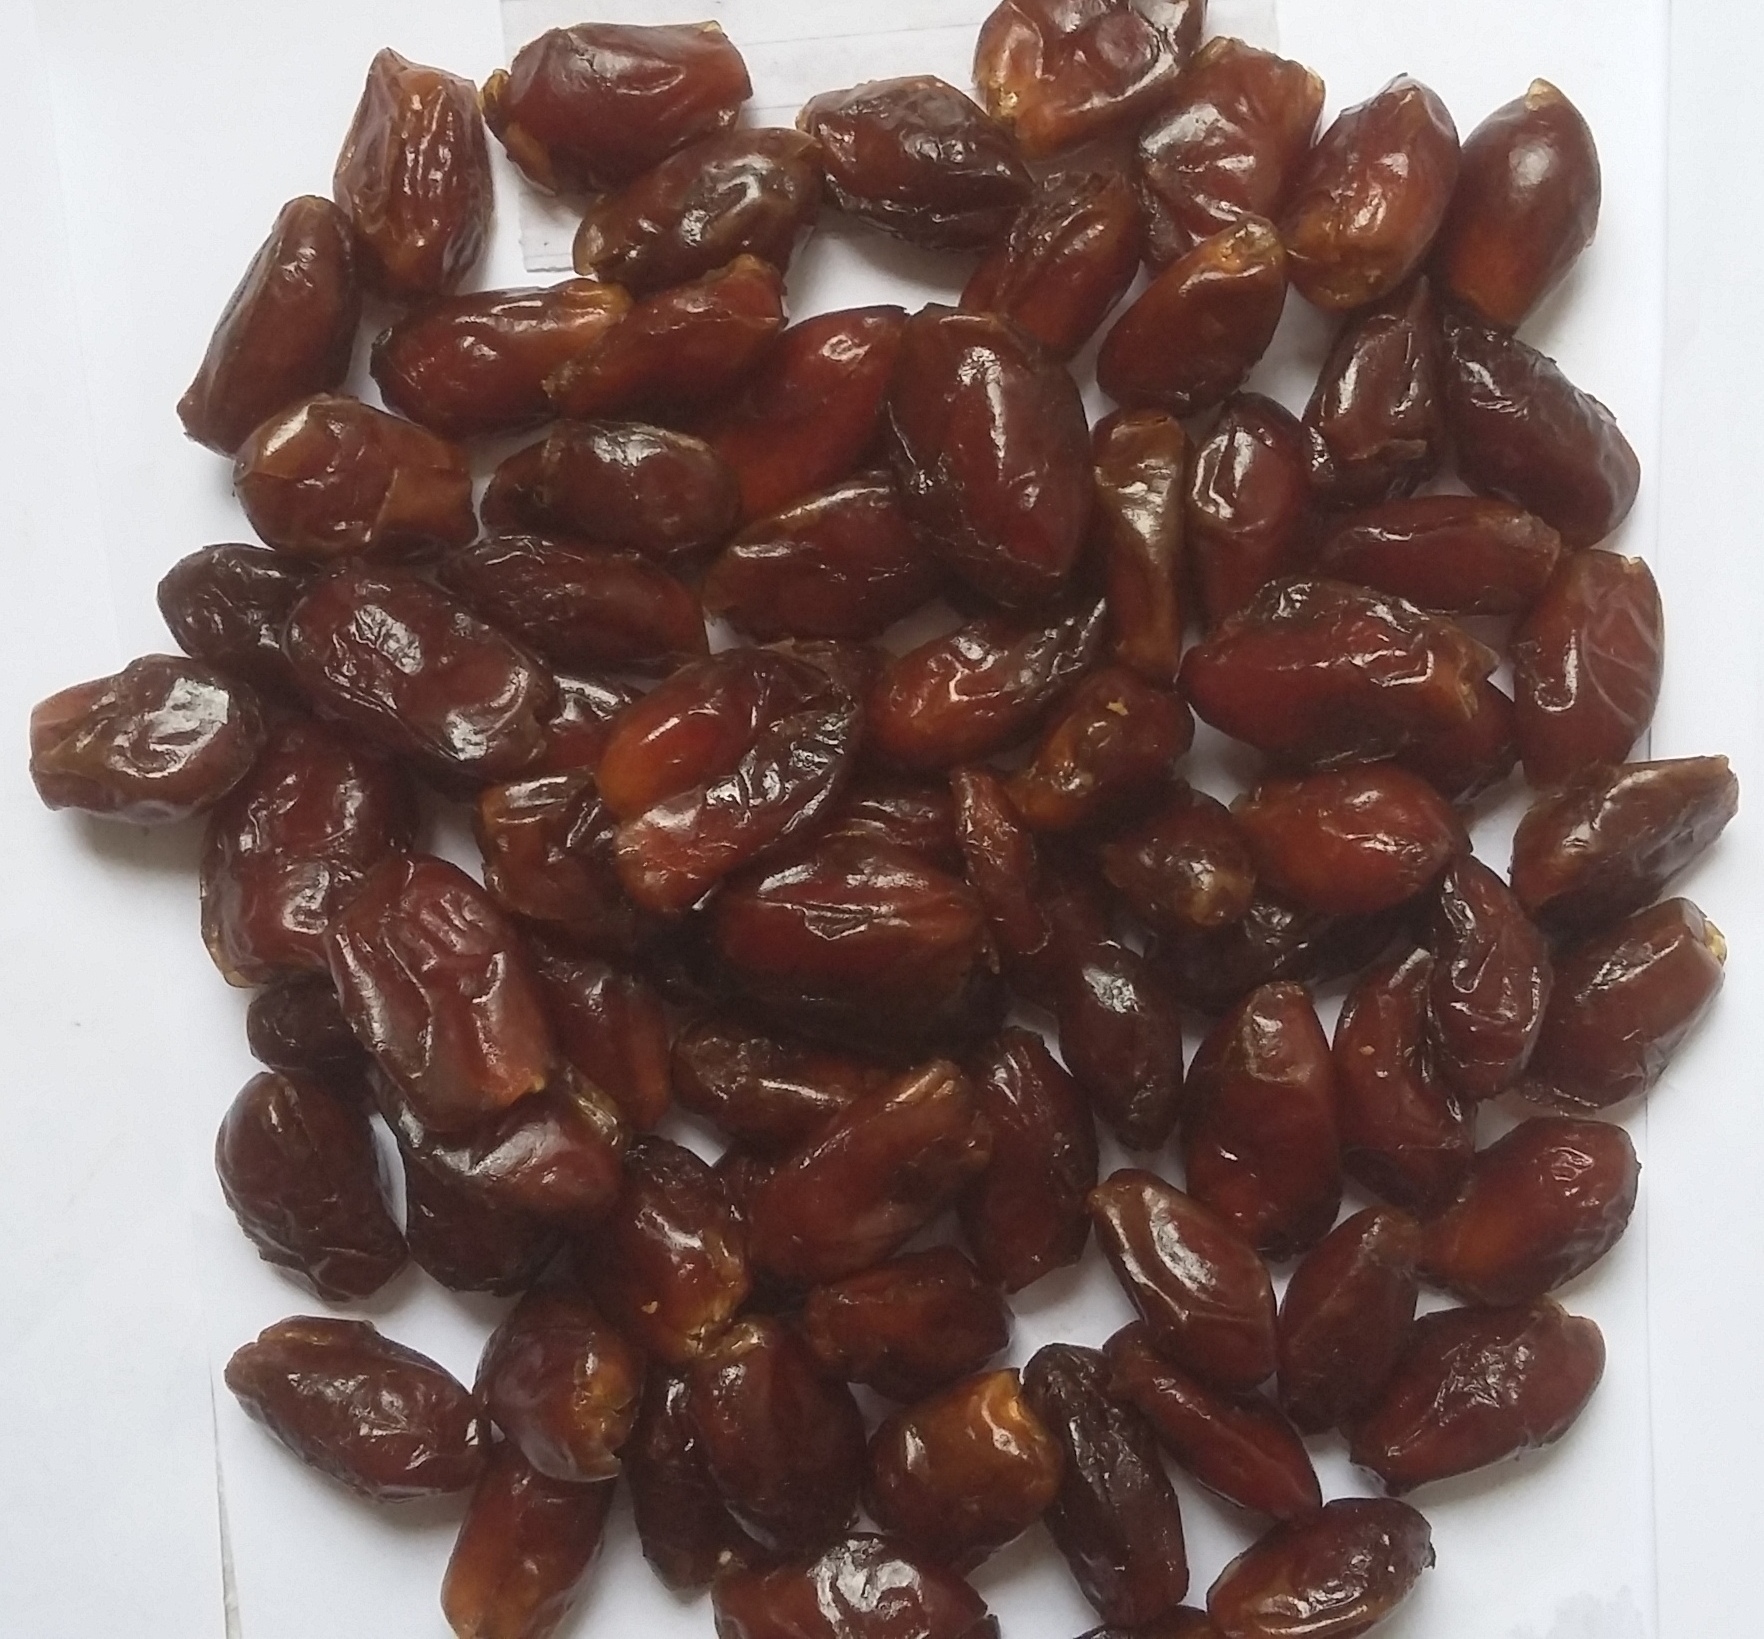 GAQ-Pitted-Aseel-Dates